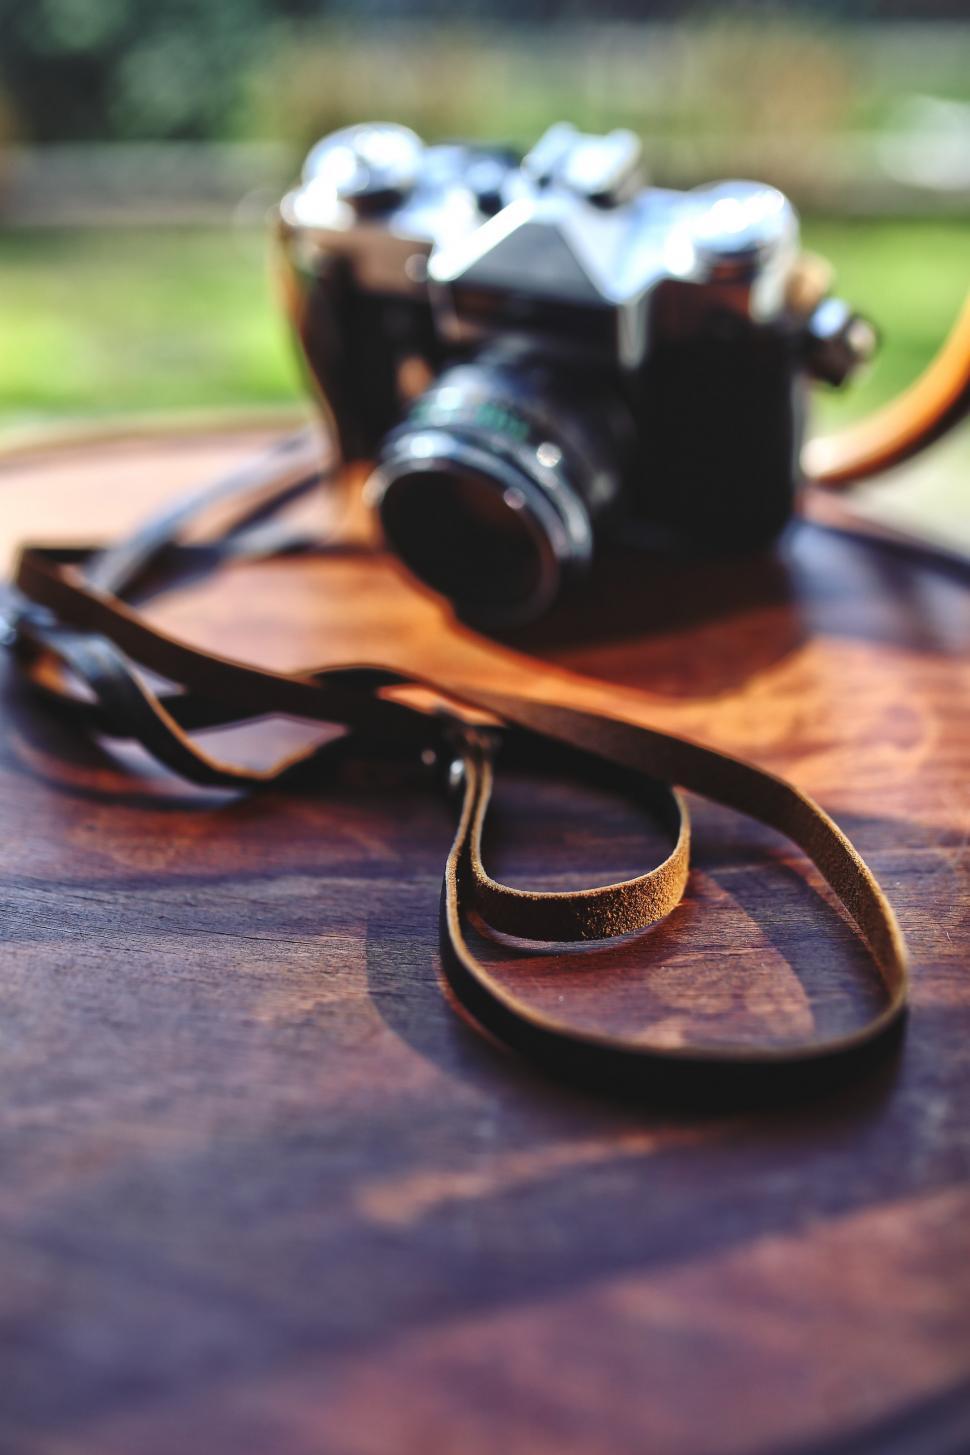 Free Image of Camera on Wooden Table 